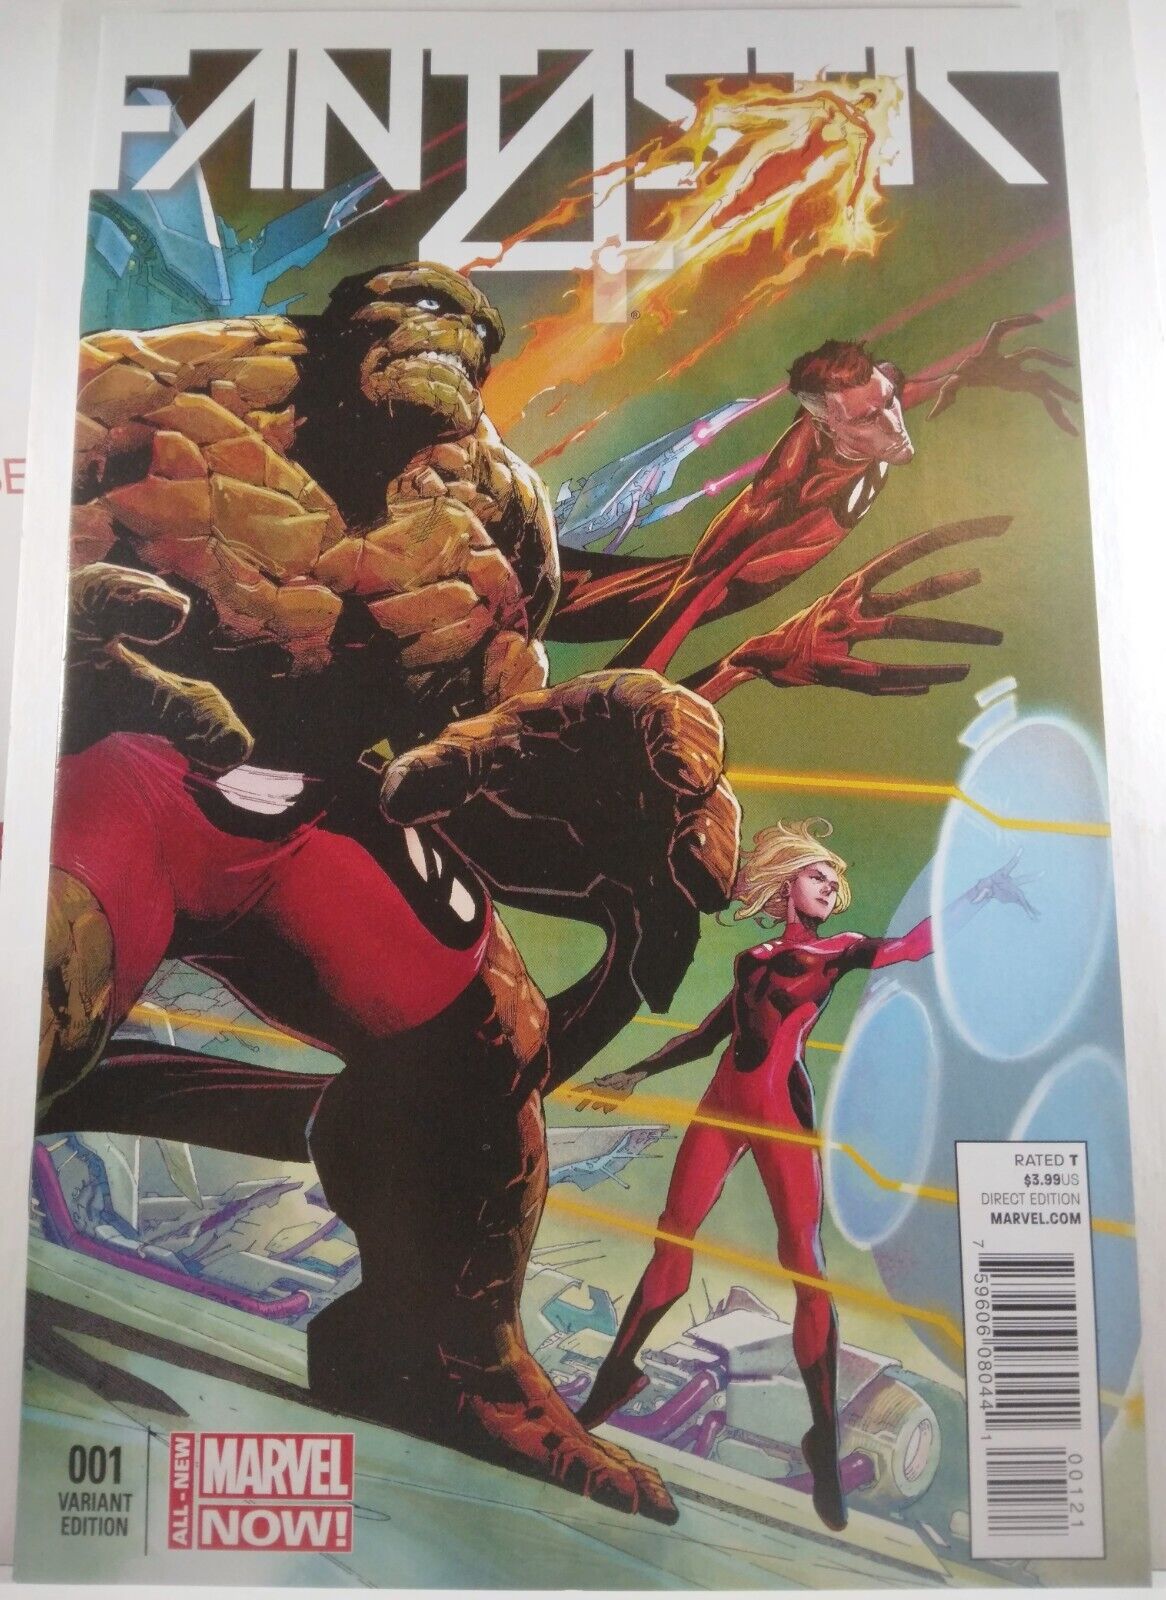 🔥 FANTASTIC FOUR #1 VF/NM 1:50 JEROME OPENA VARIANT B 2014 ALL NEW MARVEL NOW